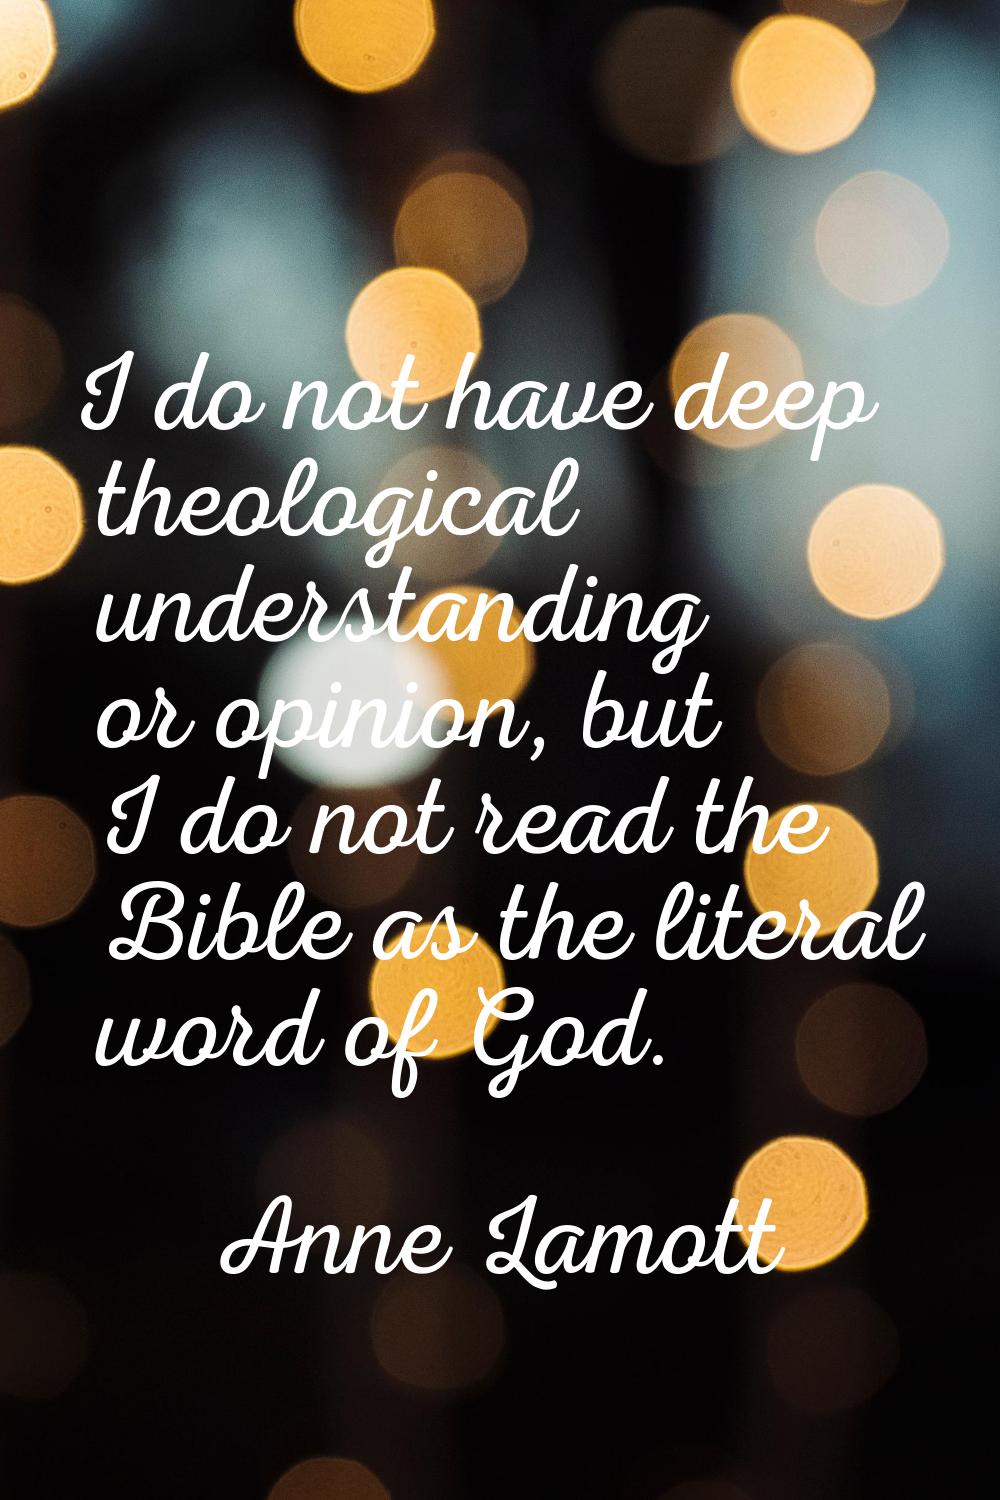 I do not have deep theological understanding or opinion, but I do not read the Bible as the literal